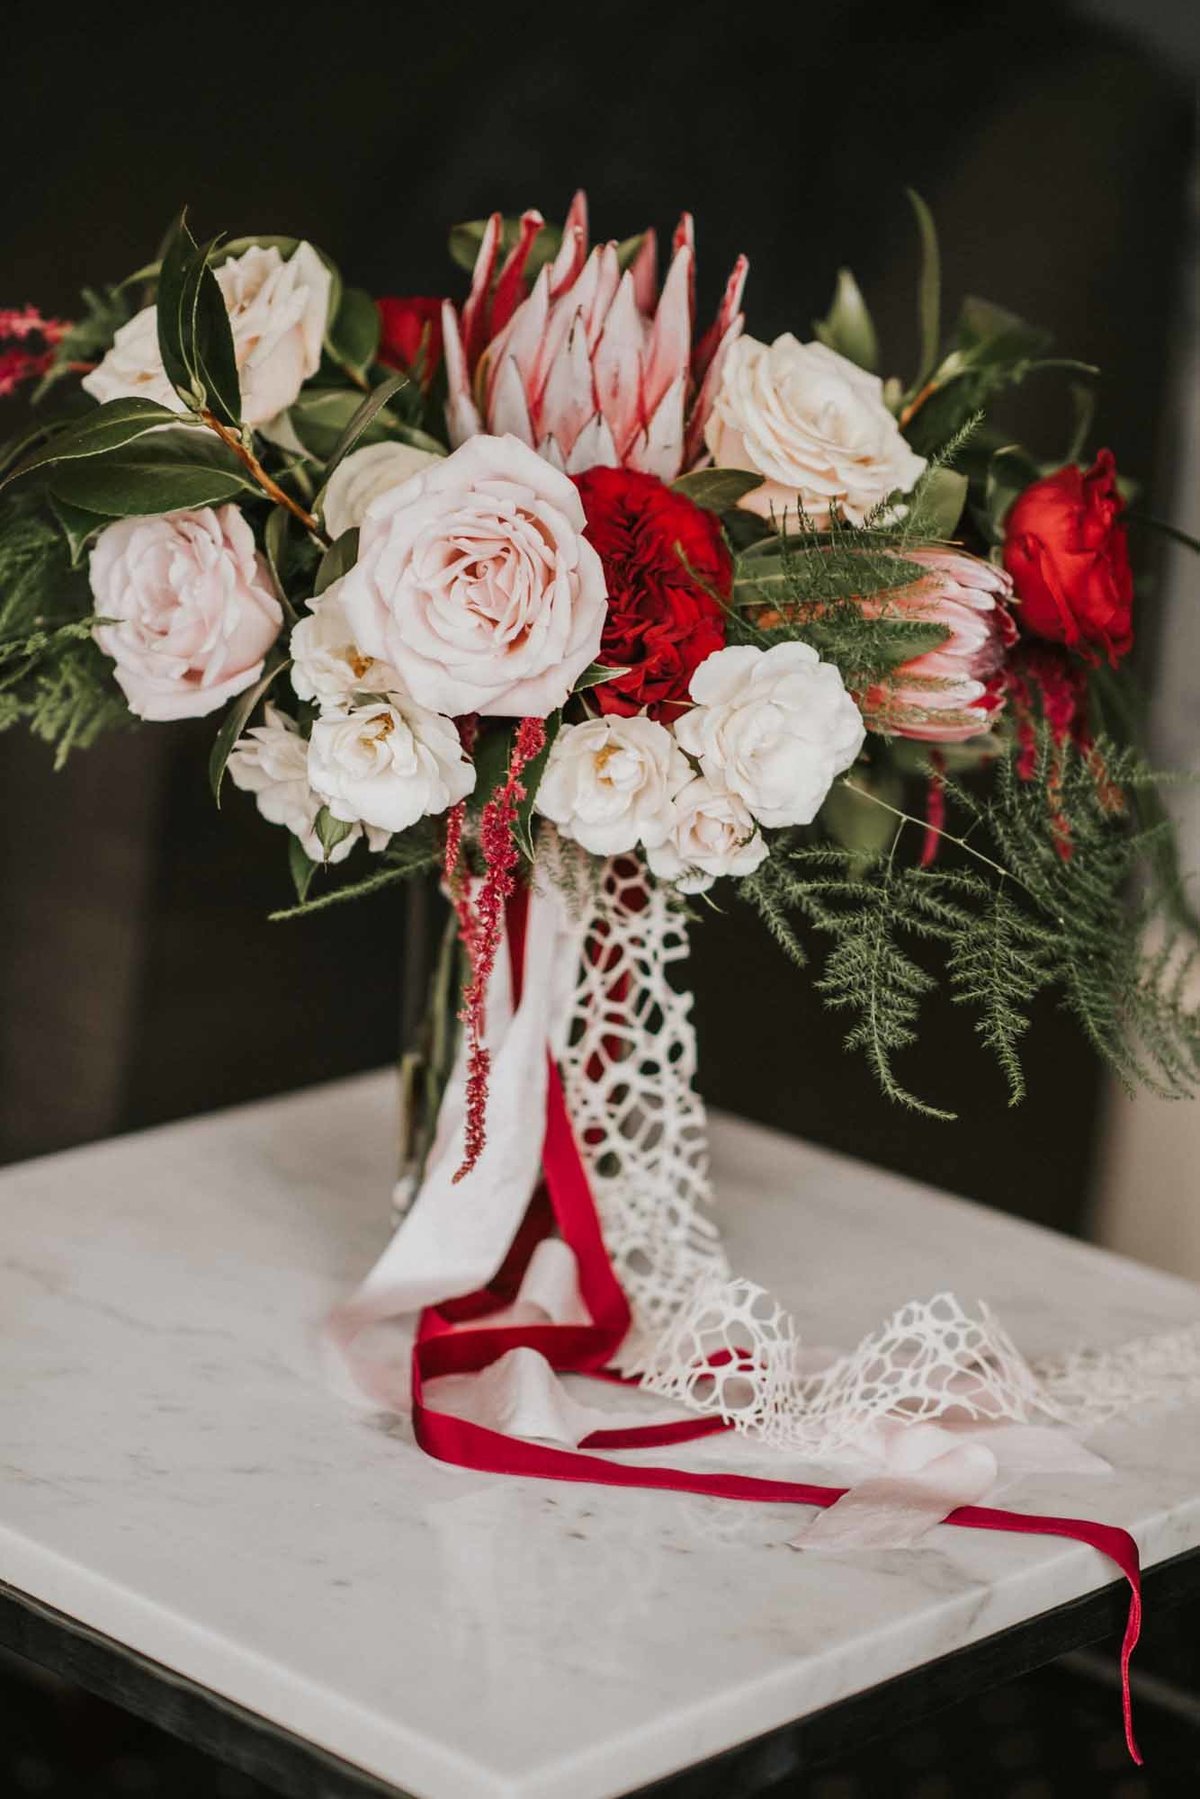 bridal bouquet of winder flowers with pink protea, blush roses, ferns, and long ribbon streamers